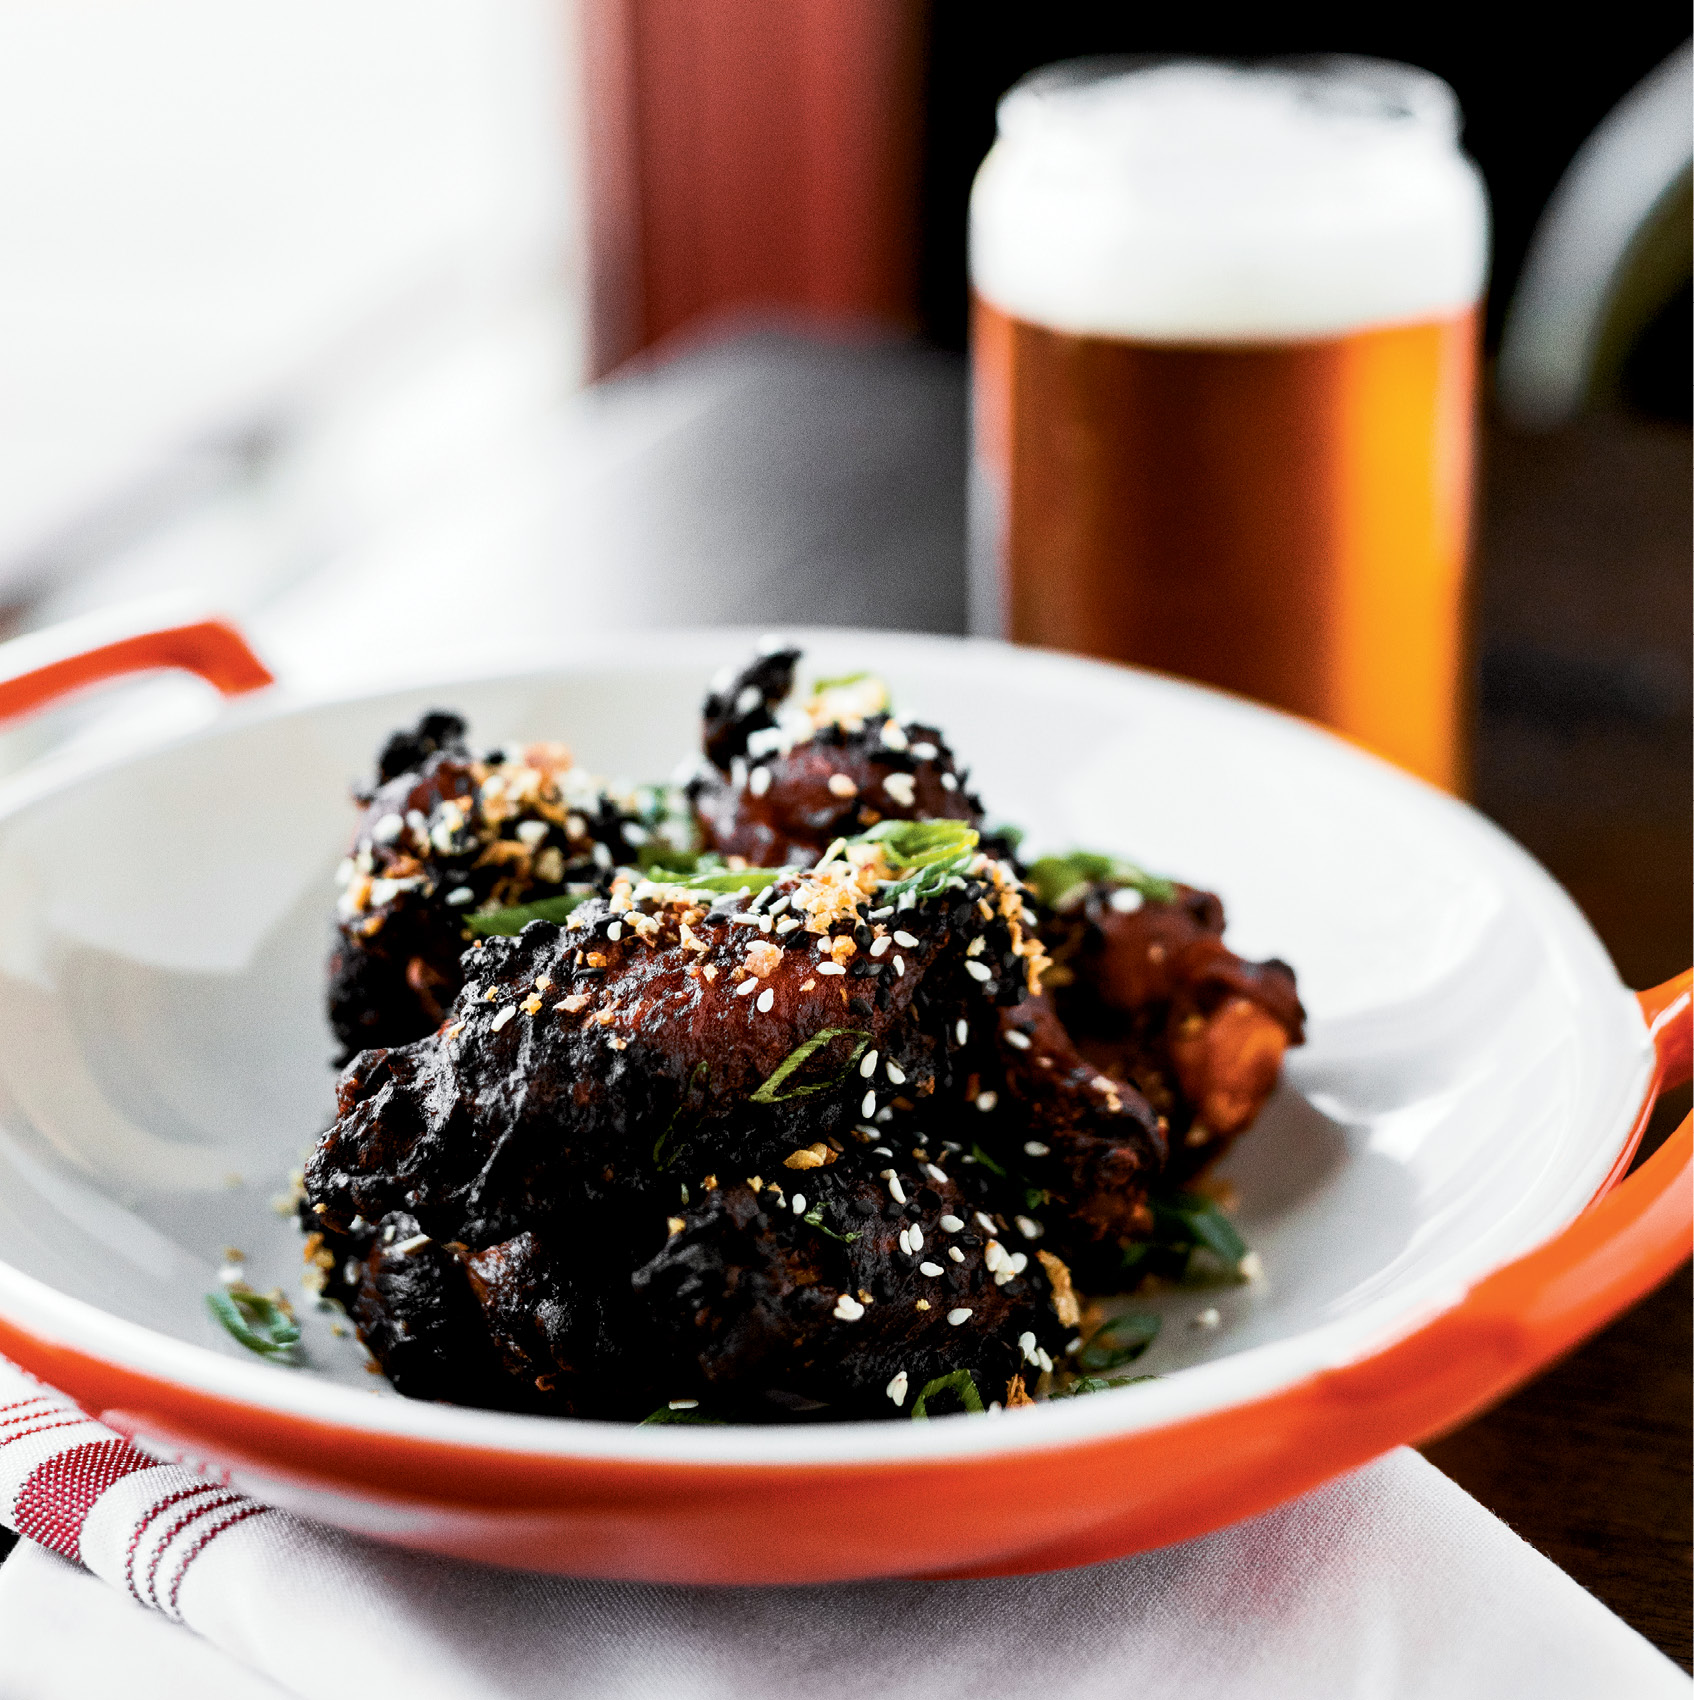 Clever Classics: Chicken wings are revamped with Korean mustard, ginger, fried garlic, and sesame seeds.